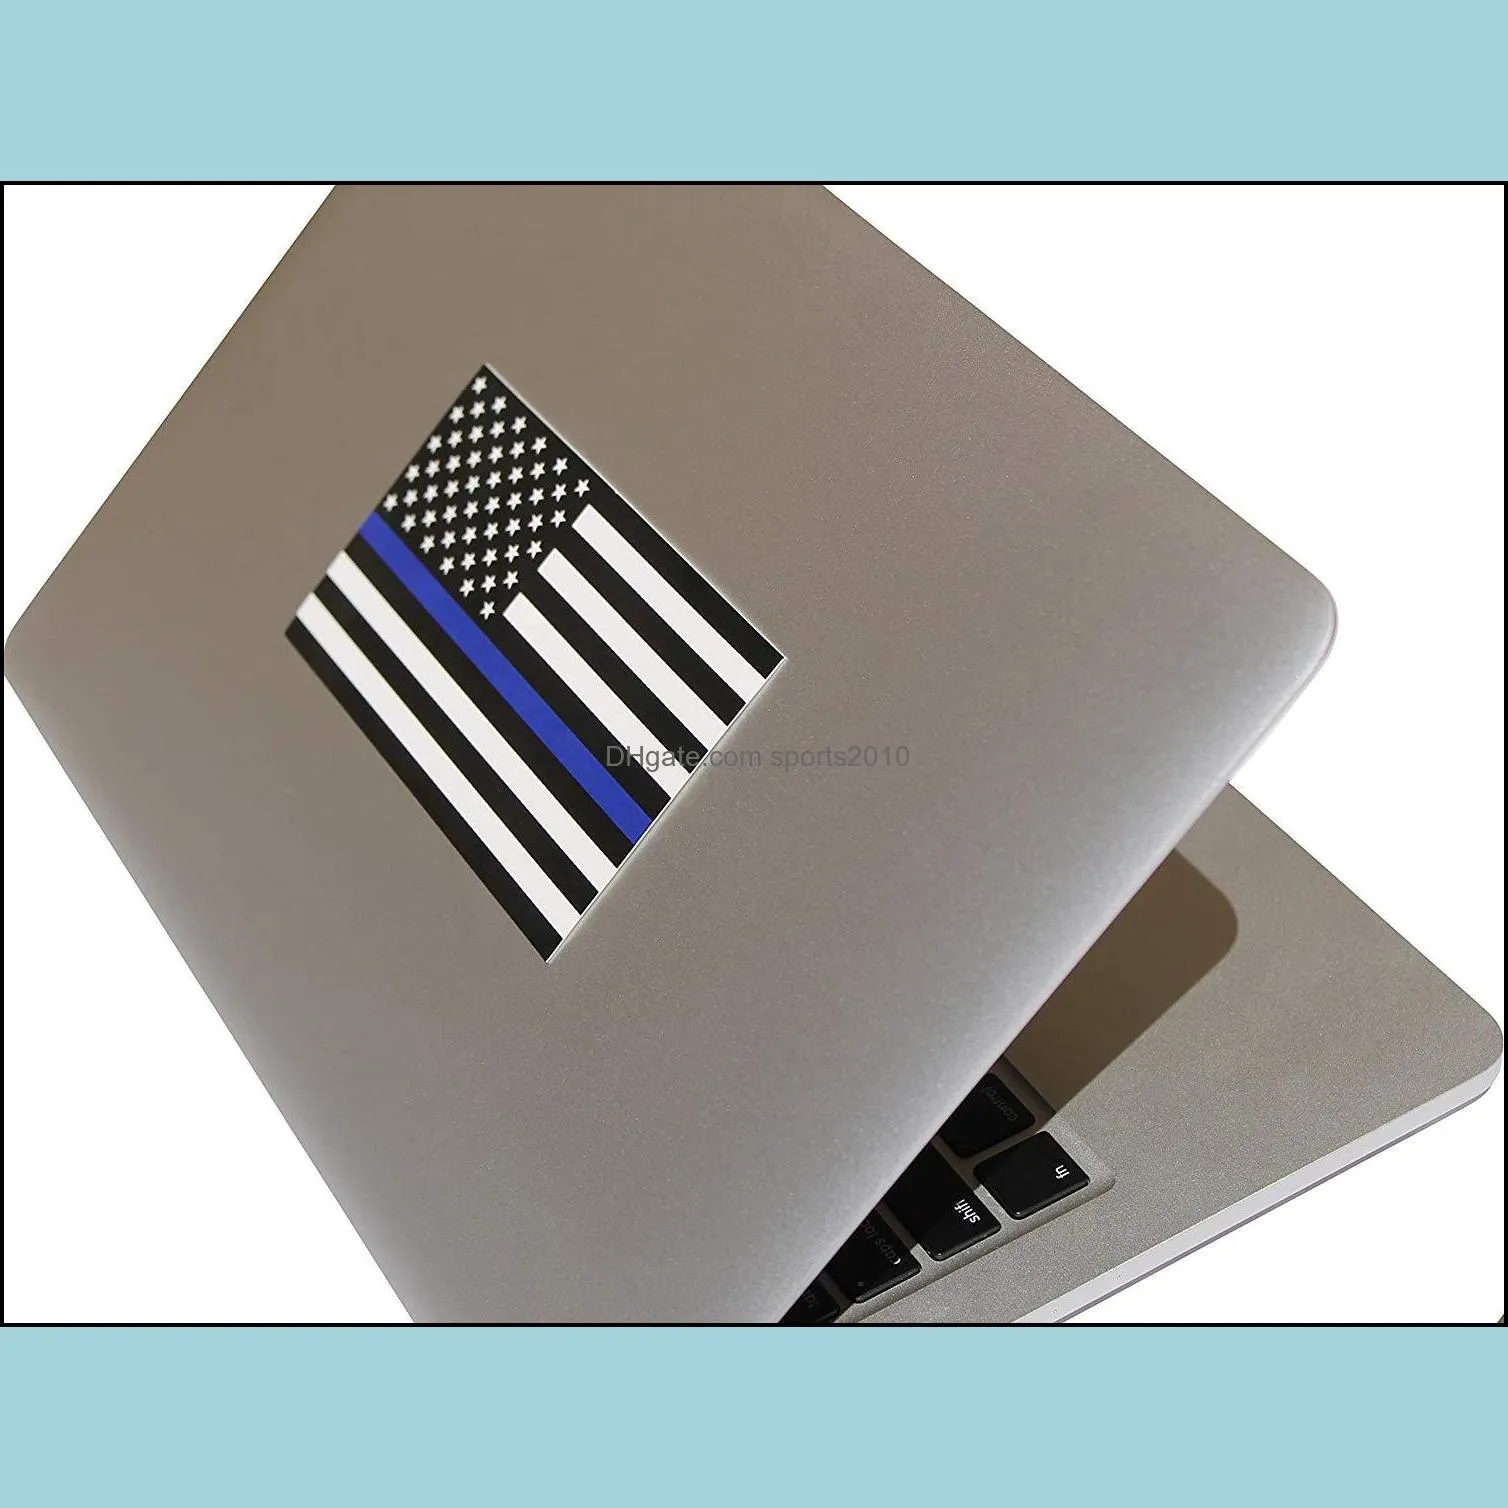 Thin Blue Line Flag Decal - 2.5*4.5 in. Black White and Blue American Flag Sticker for Cars and Trucks